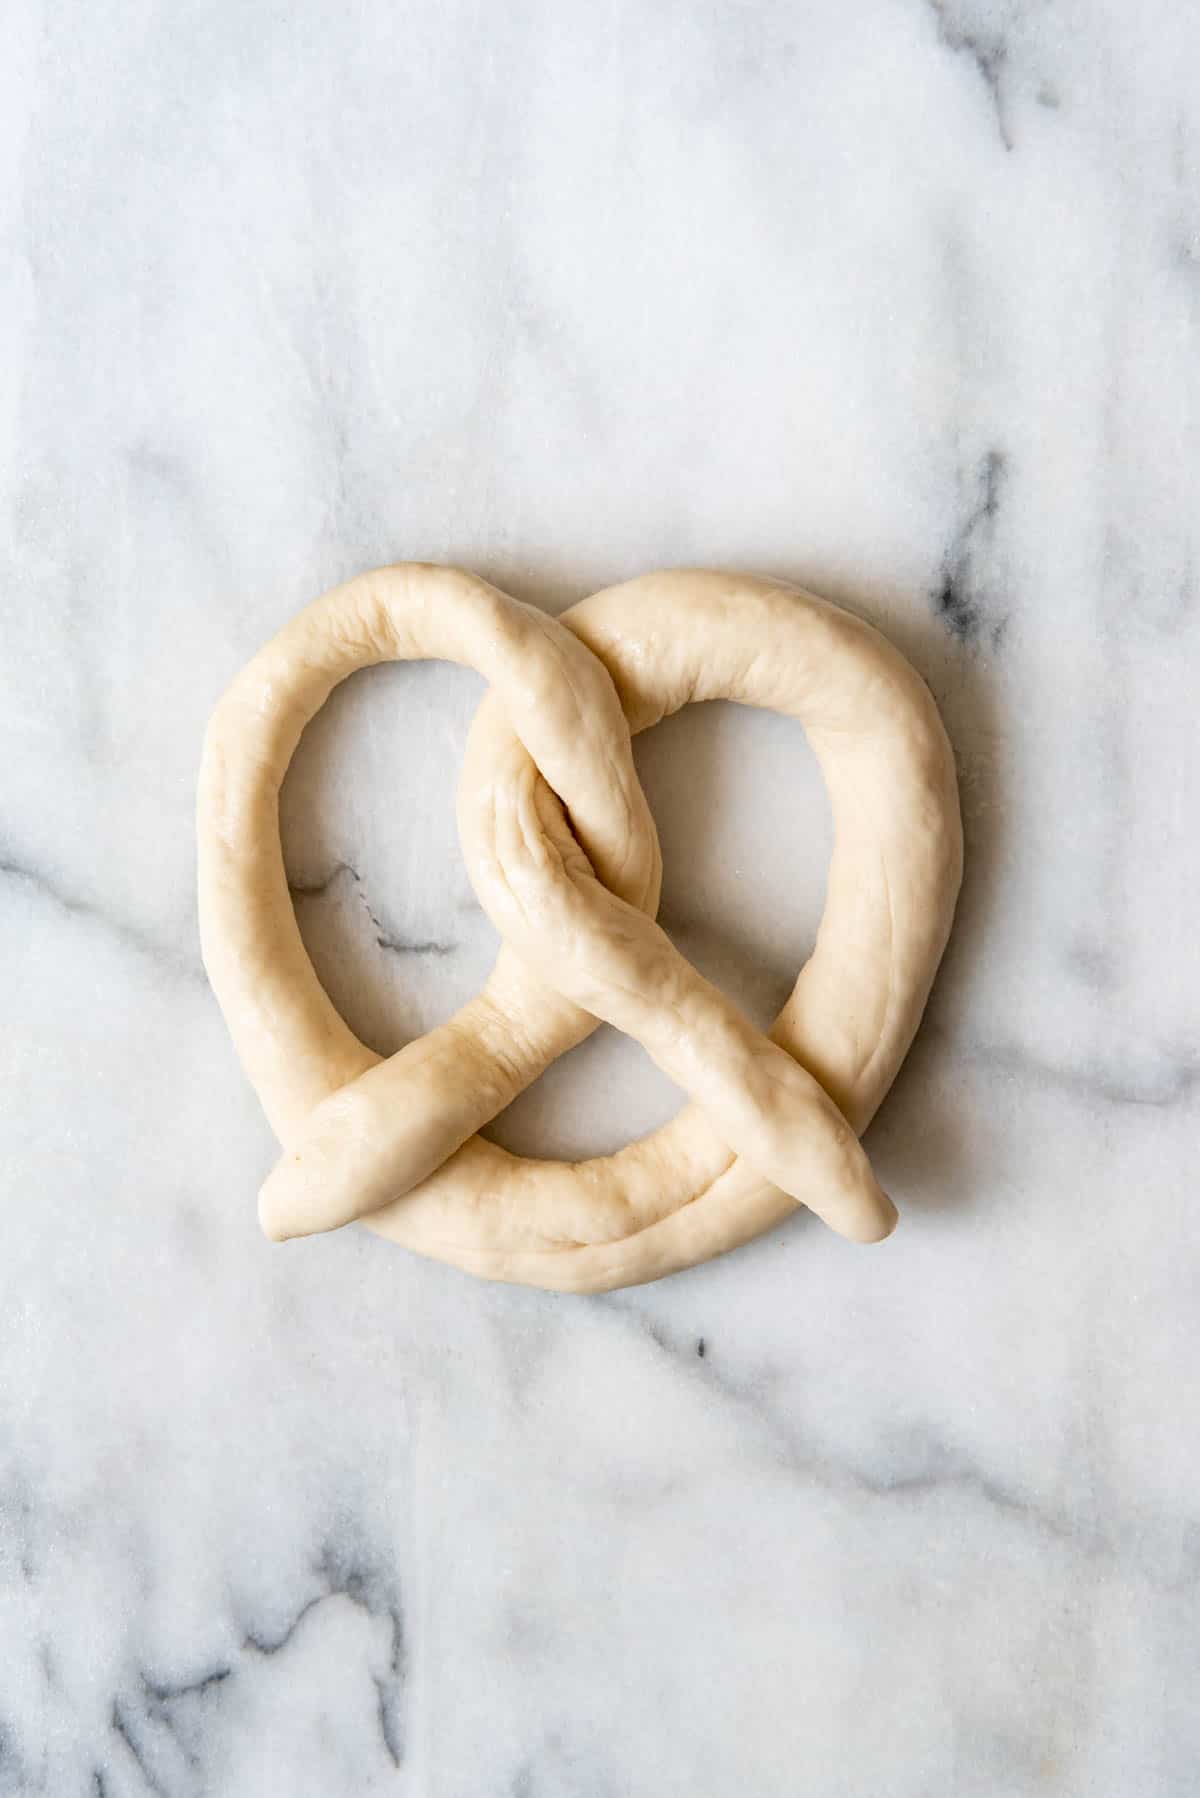 An image of pretzel dough ready to be baked.